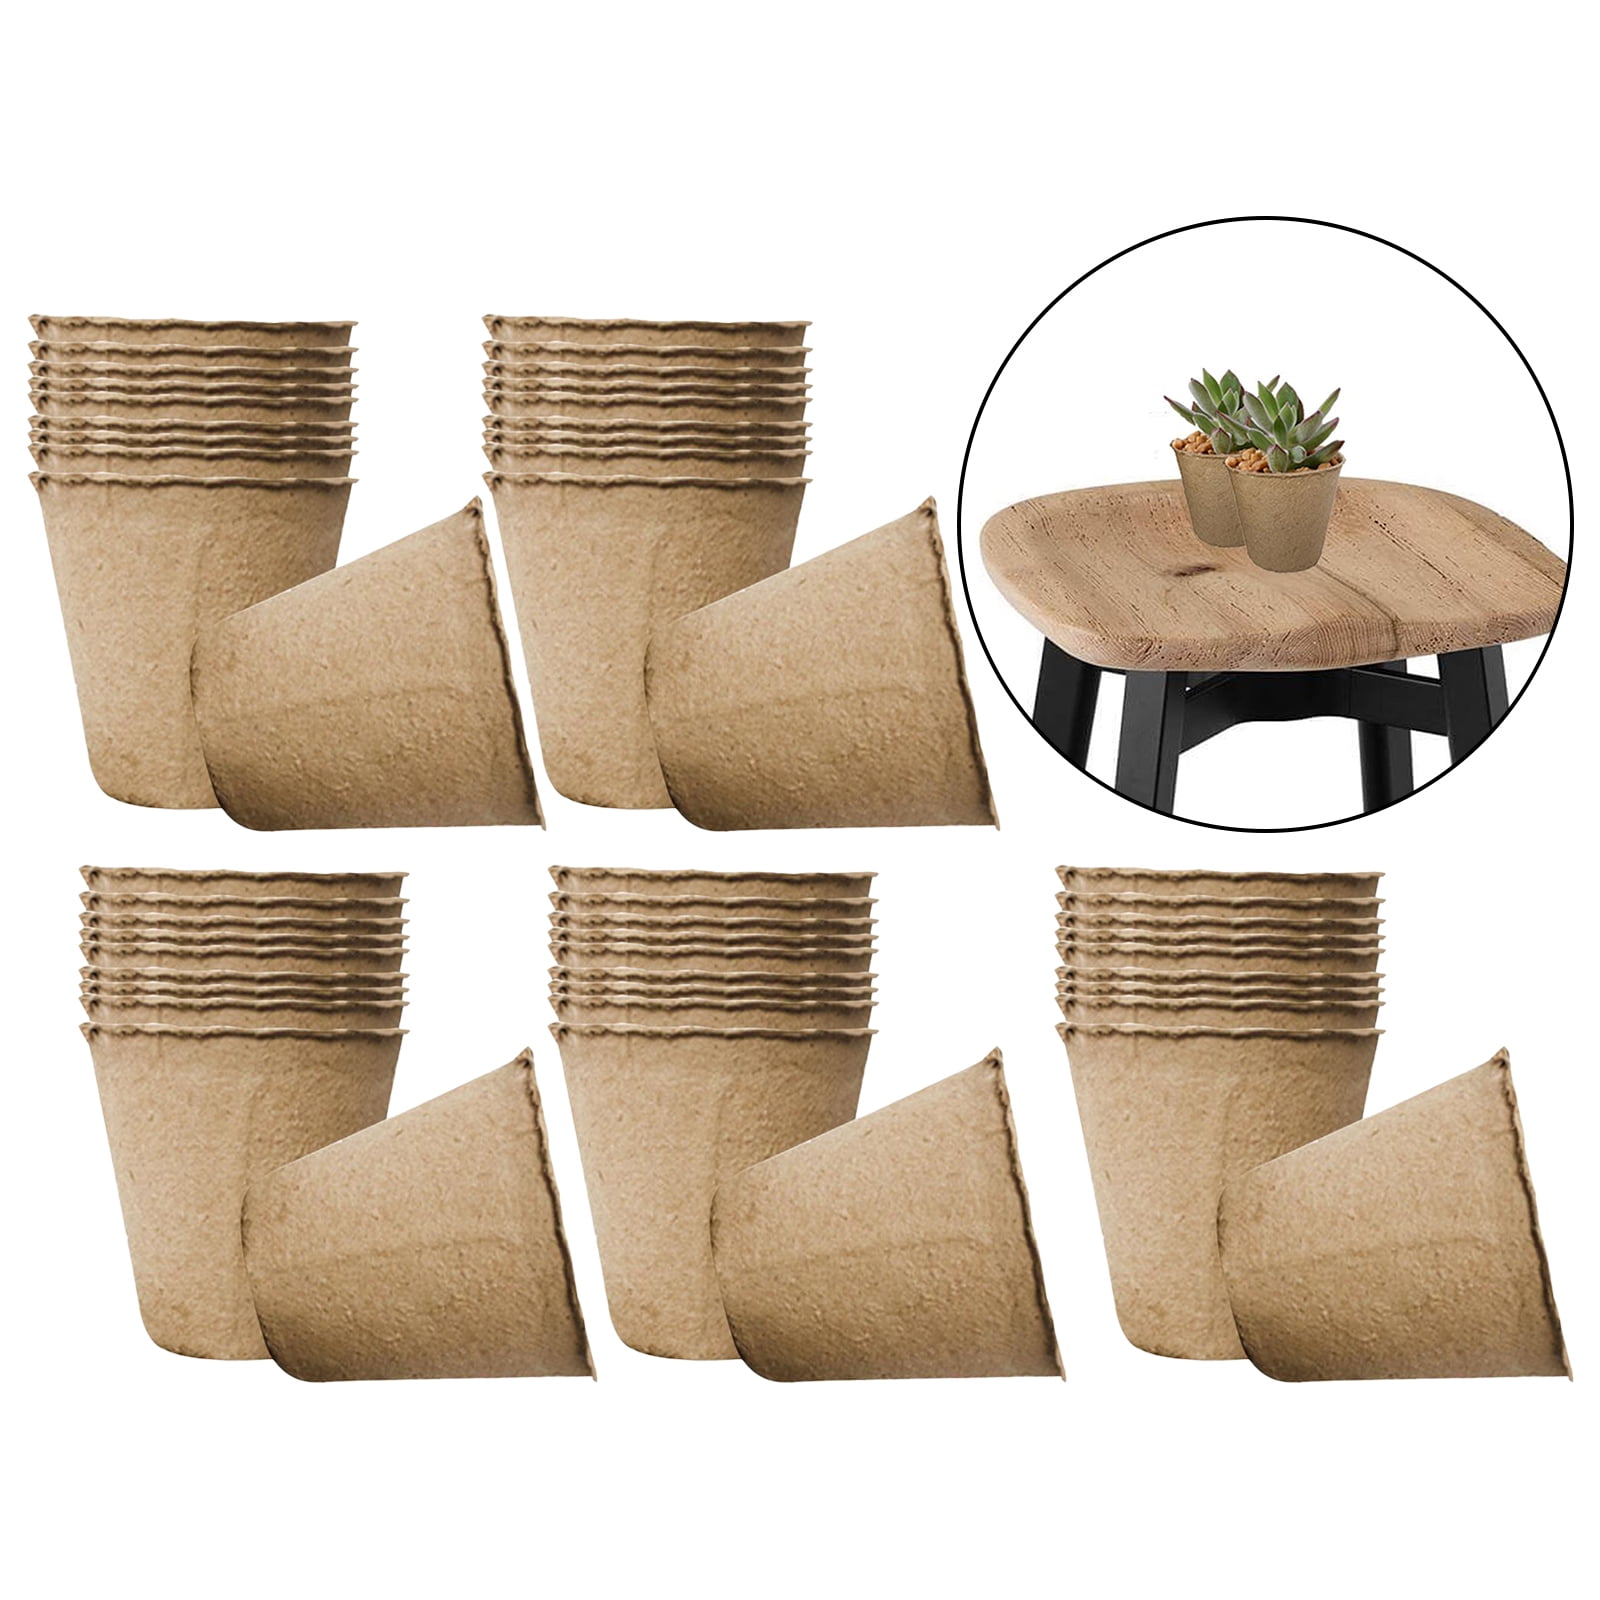 Biodegradable Seed Tray Pulp Seedling Cups Seed Start Pots Kit 